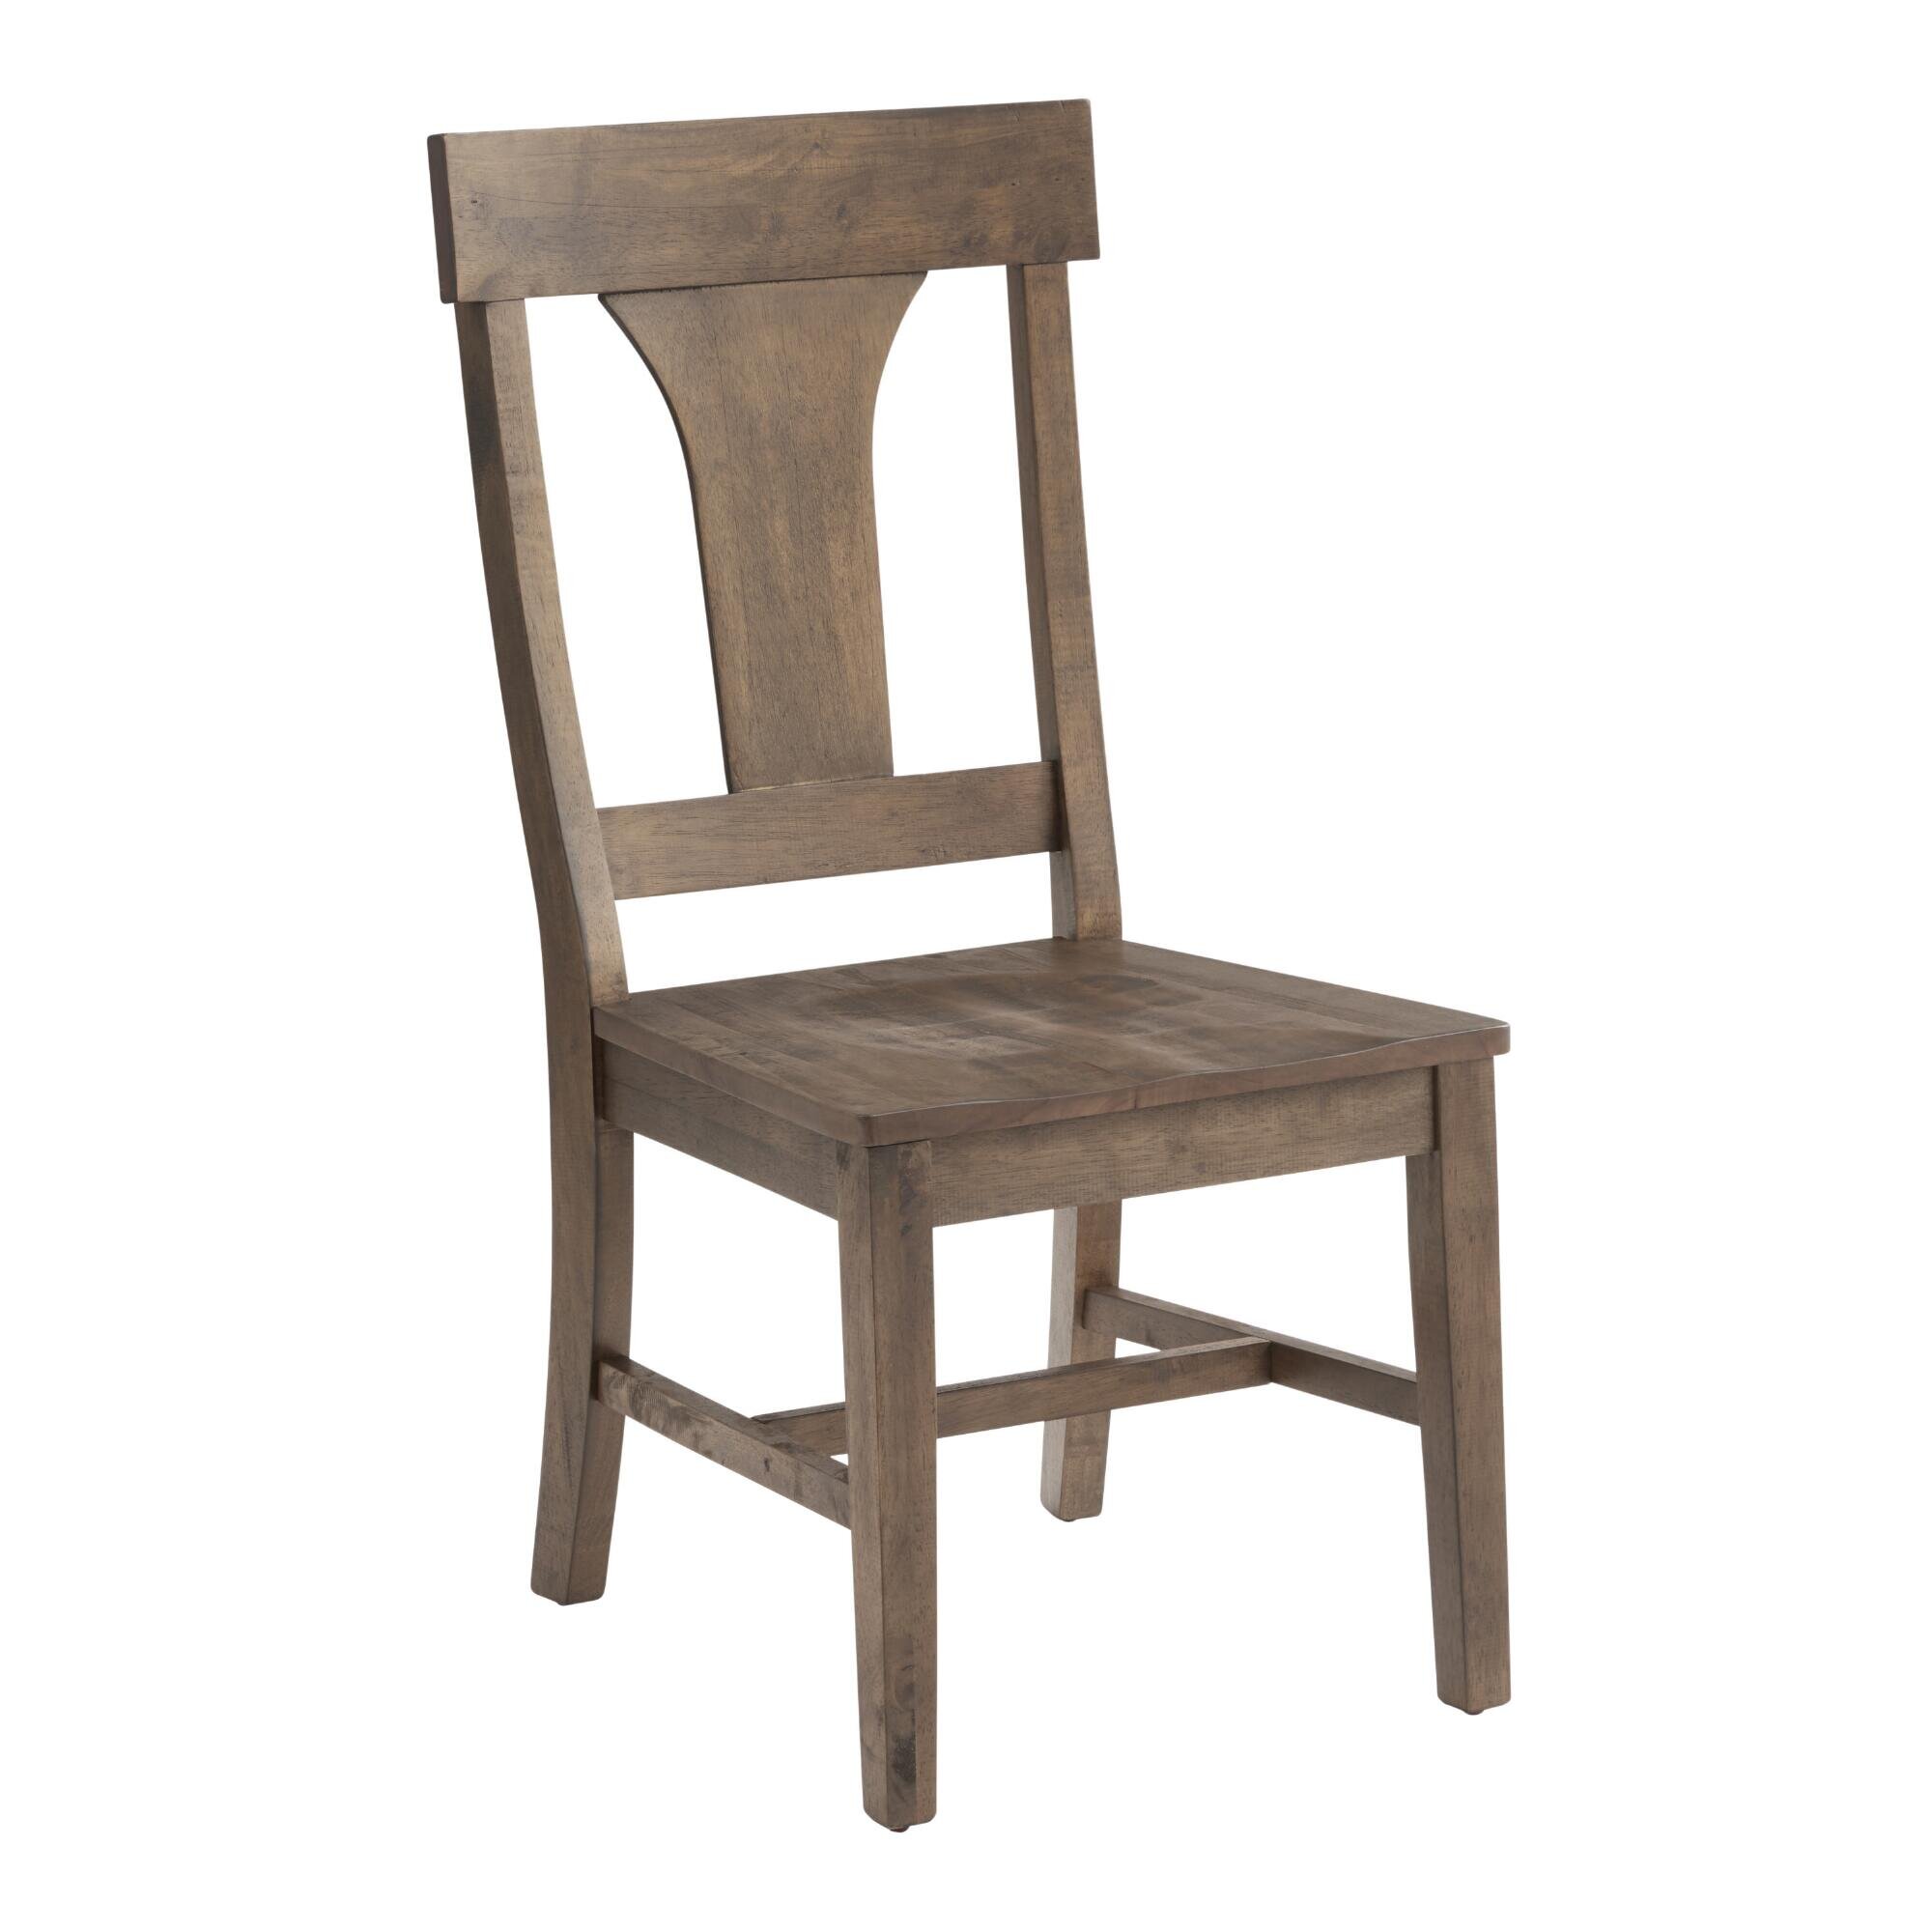 World Market - Rustic Wood Brinley Dining Chairs Set Of 2 - $279.98